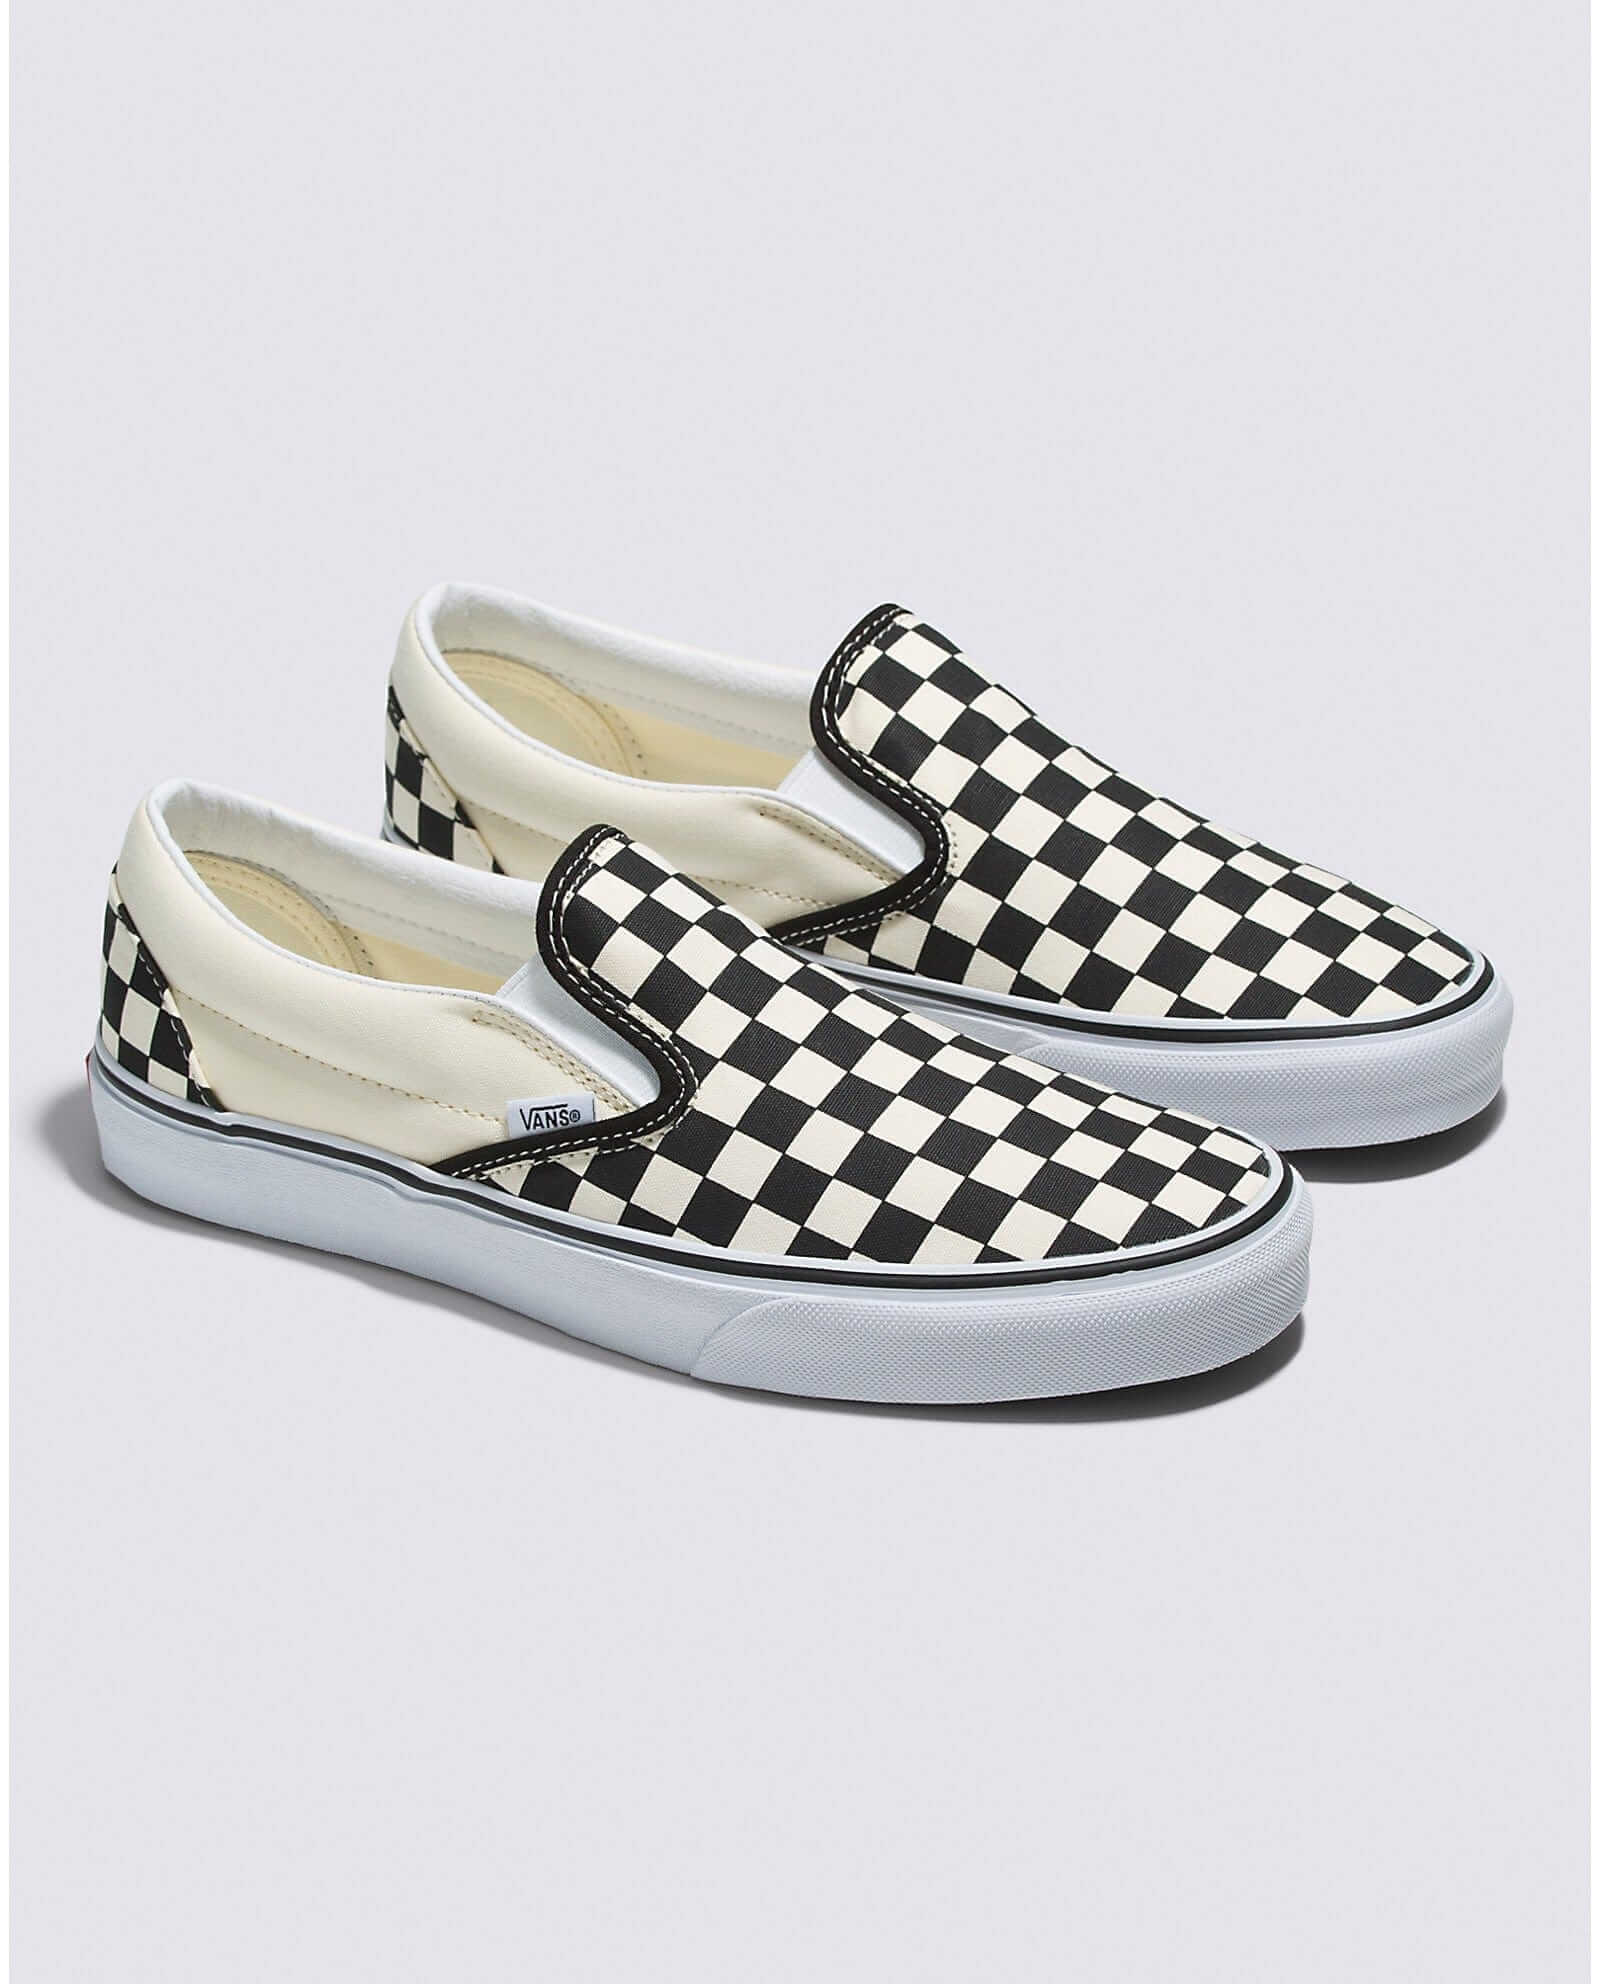 VANS Apparel & Accessories Vans Classic Slip On Black and White Checkerboard